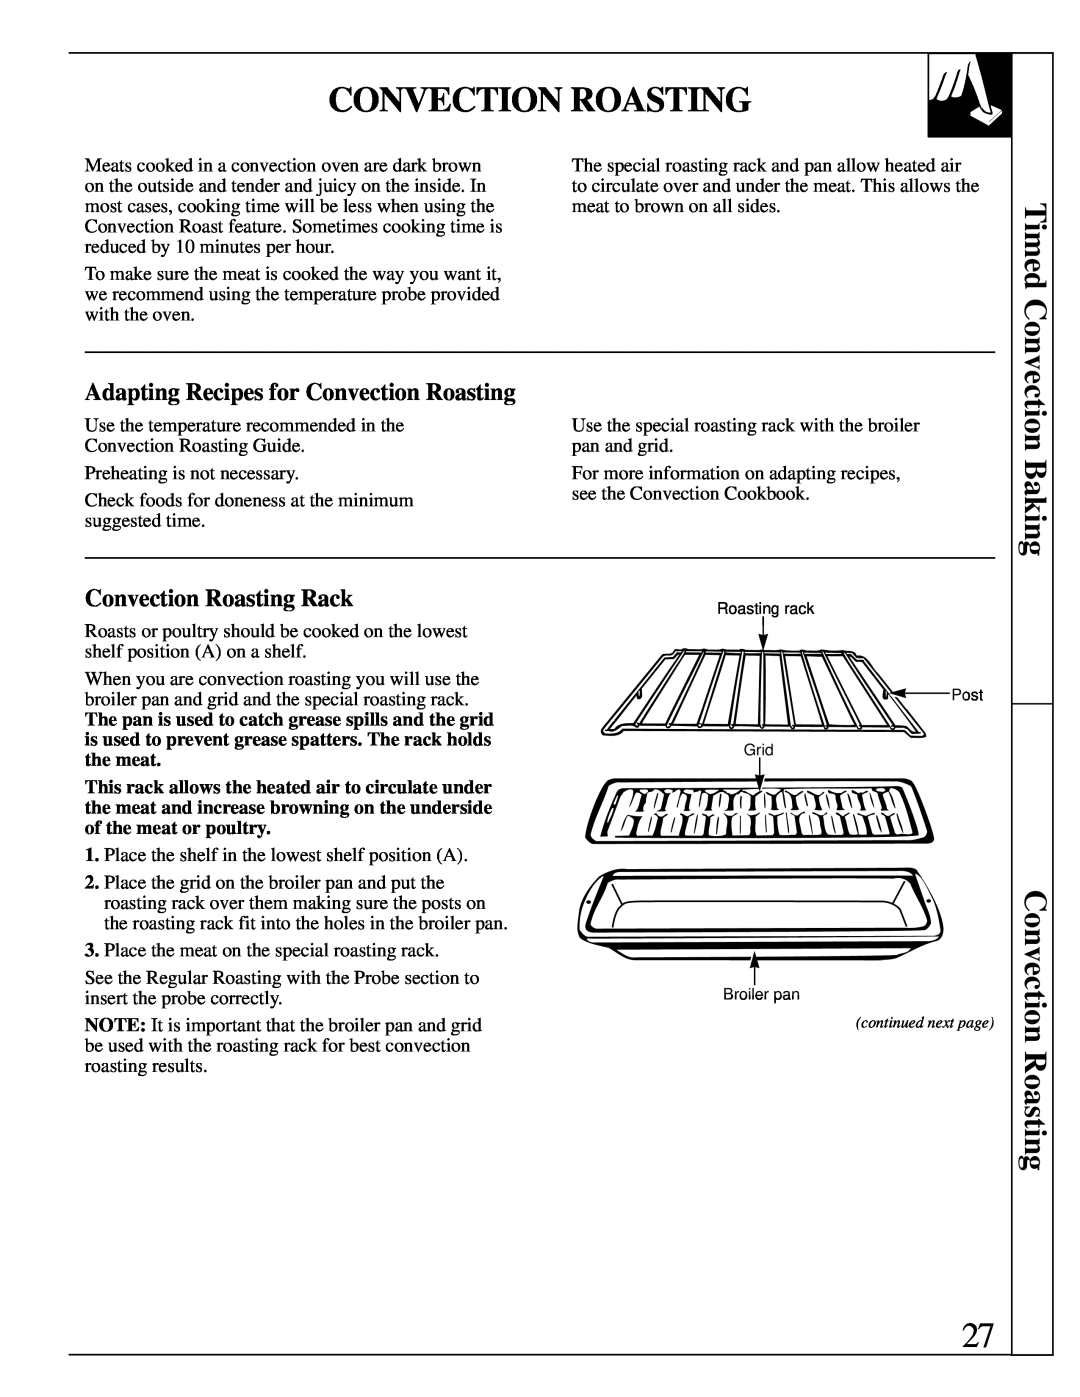 GE JBP95 warranty Baking, Adapting Recipes for Convection Roasting, Convection Roasting Rack 